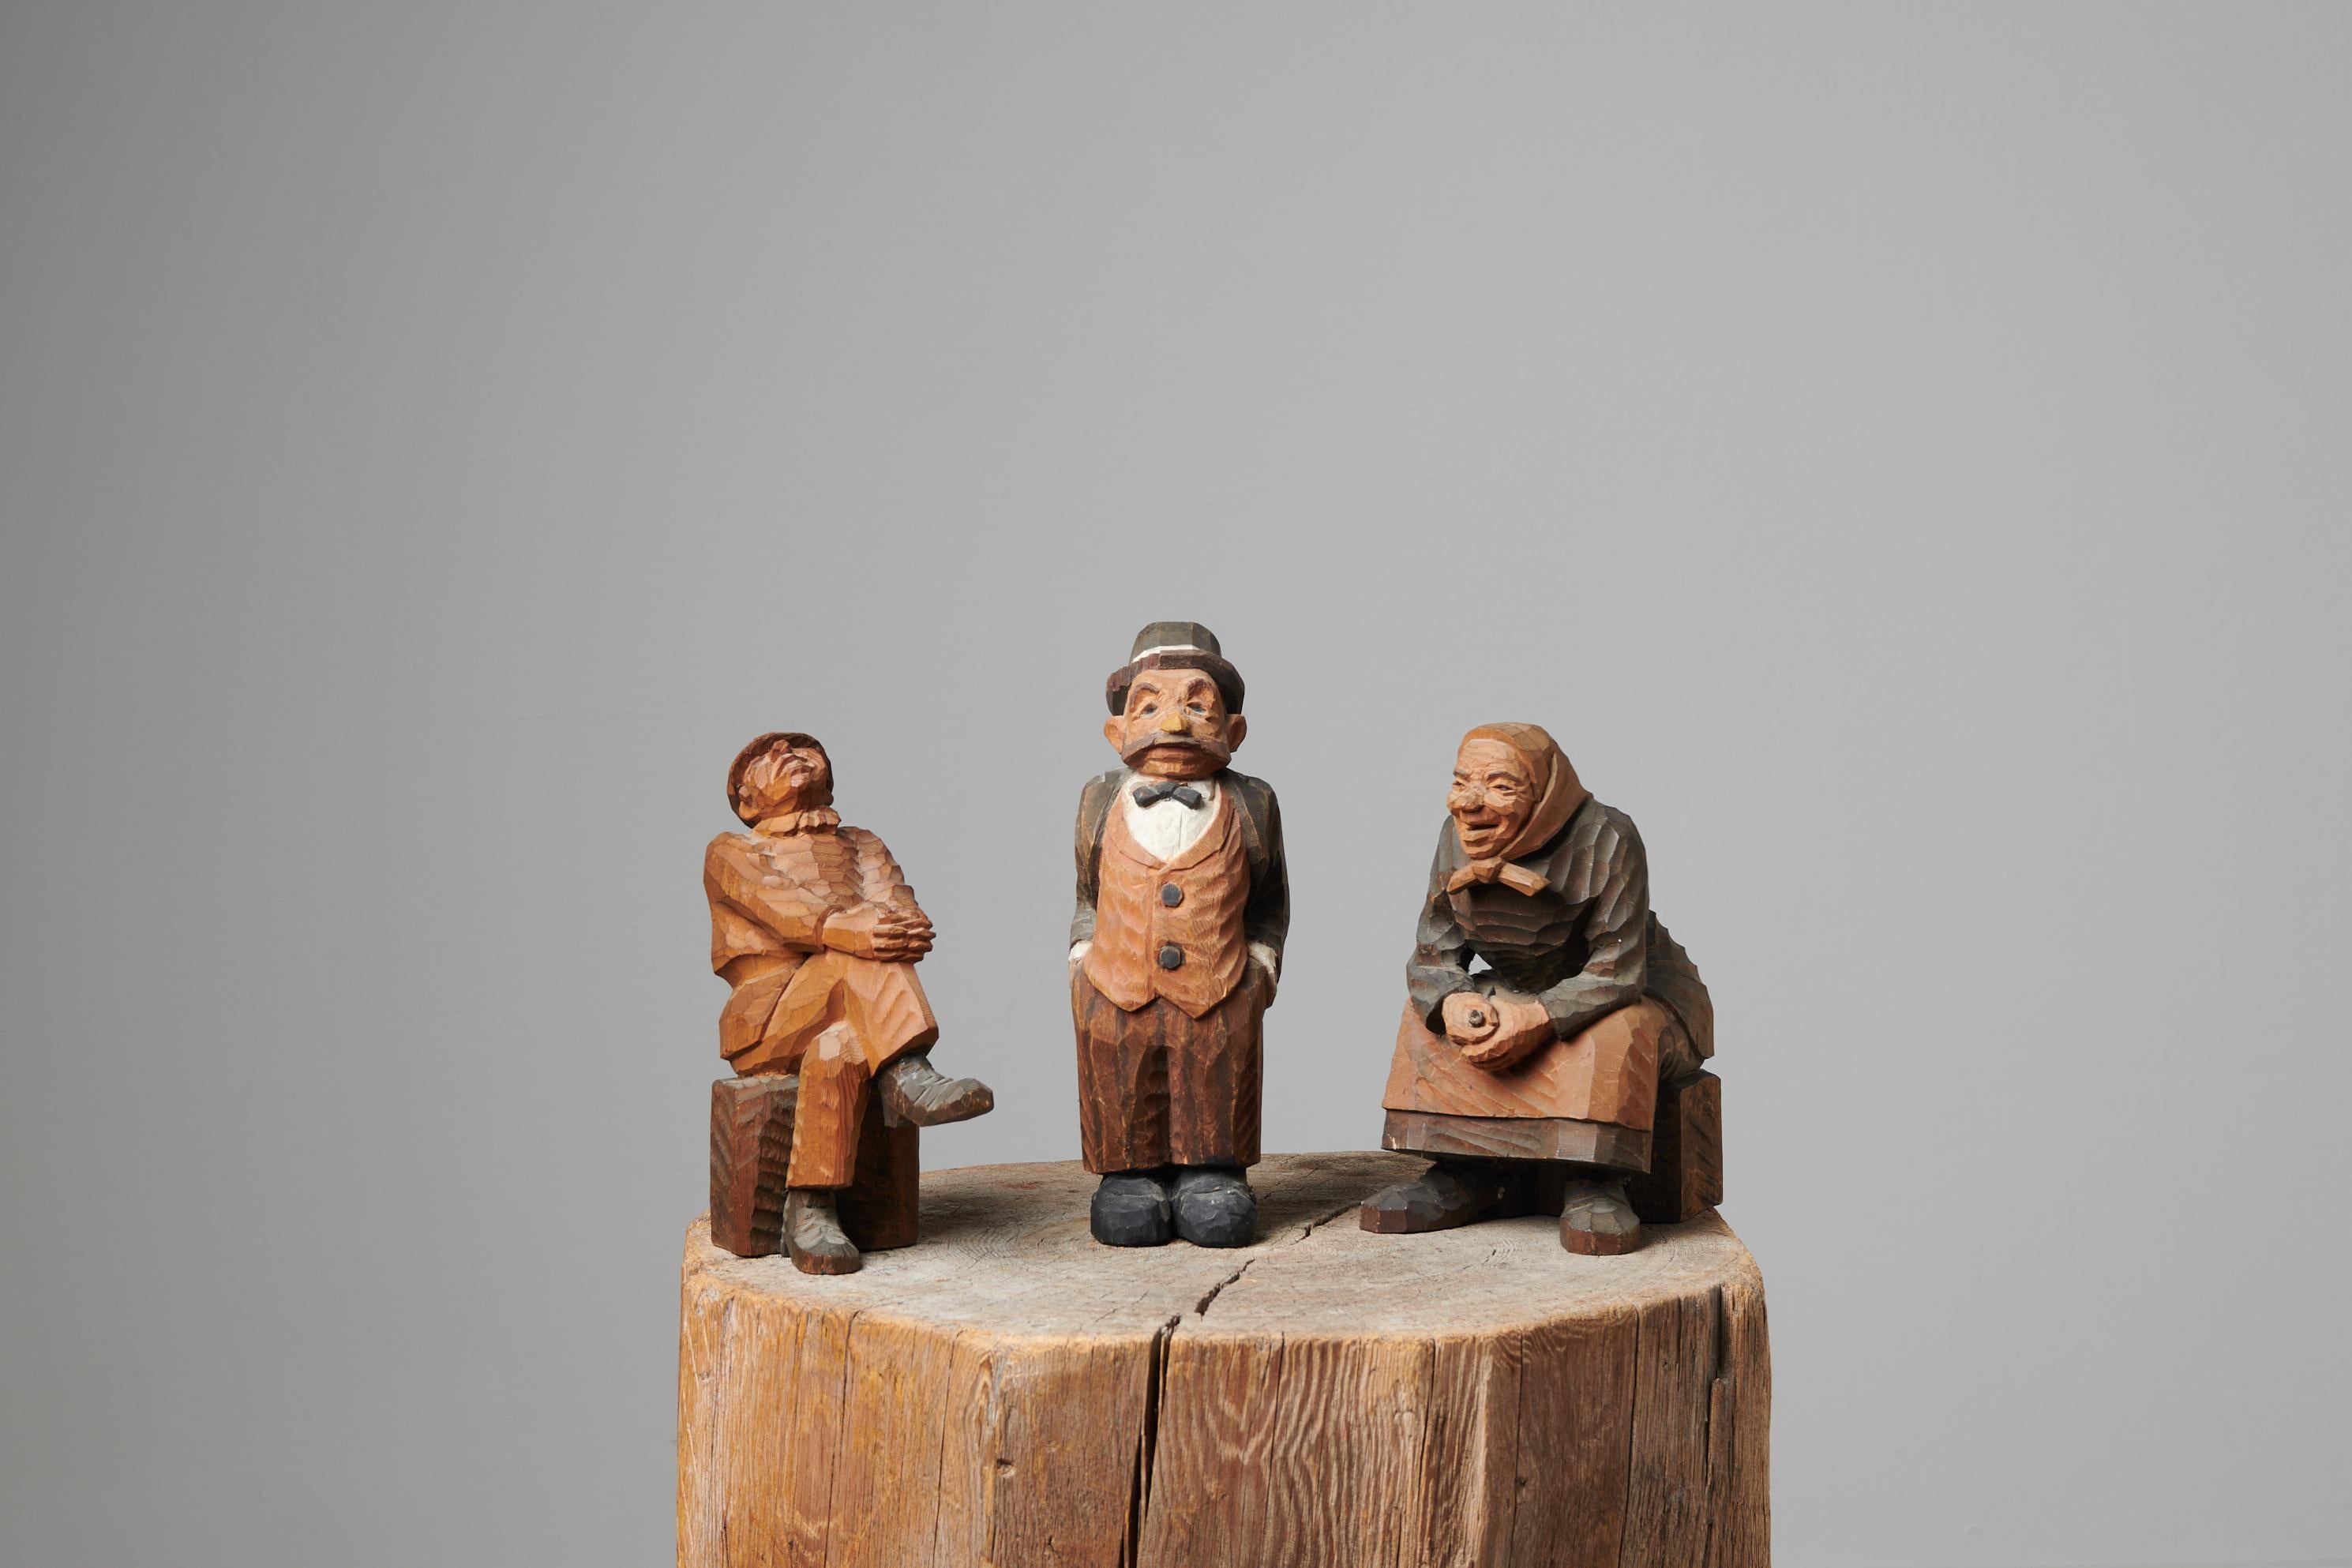 Hand-Crafted Charming Northern Swedish Handmade Folk Art Wooden Figurines For Sale